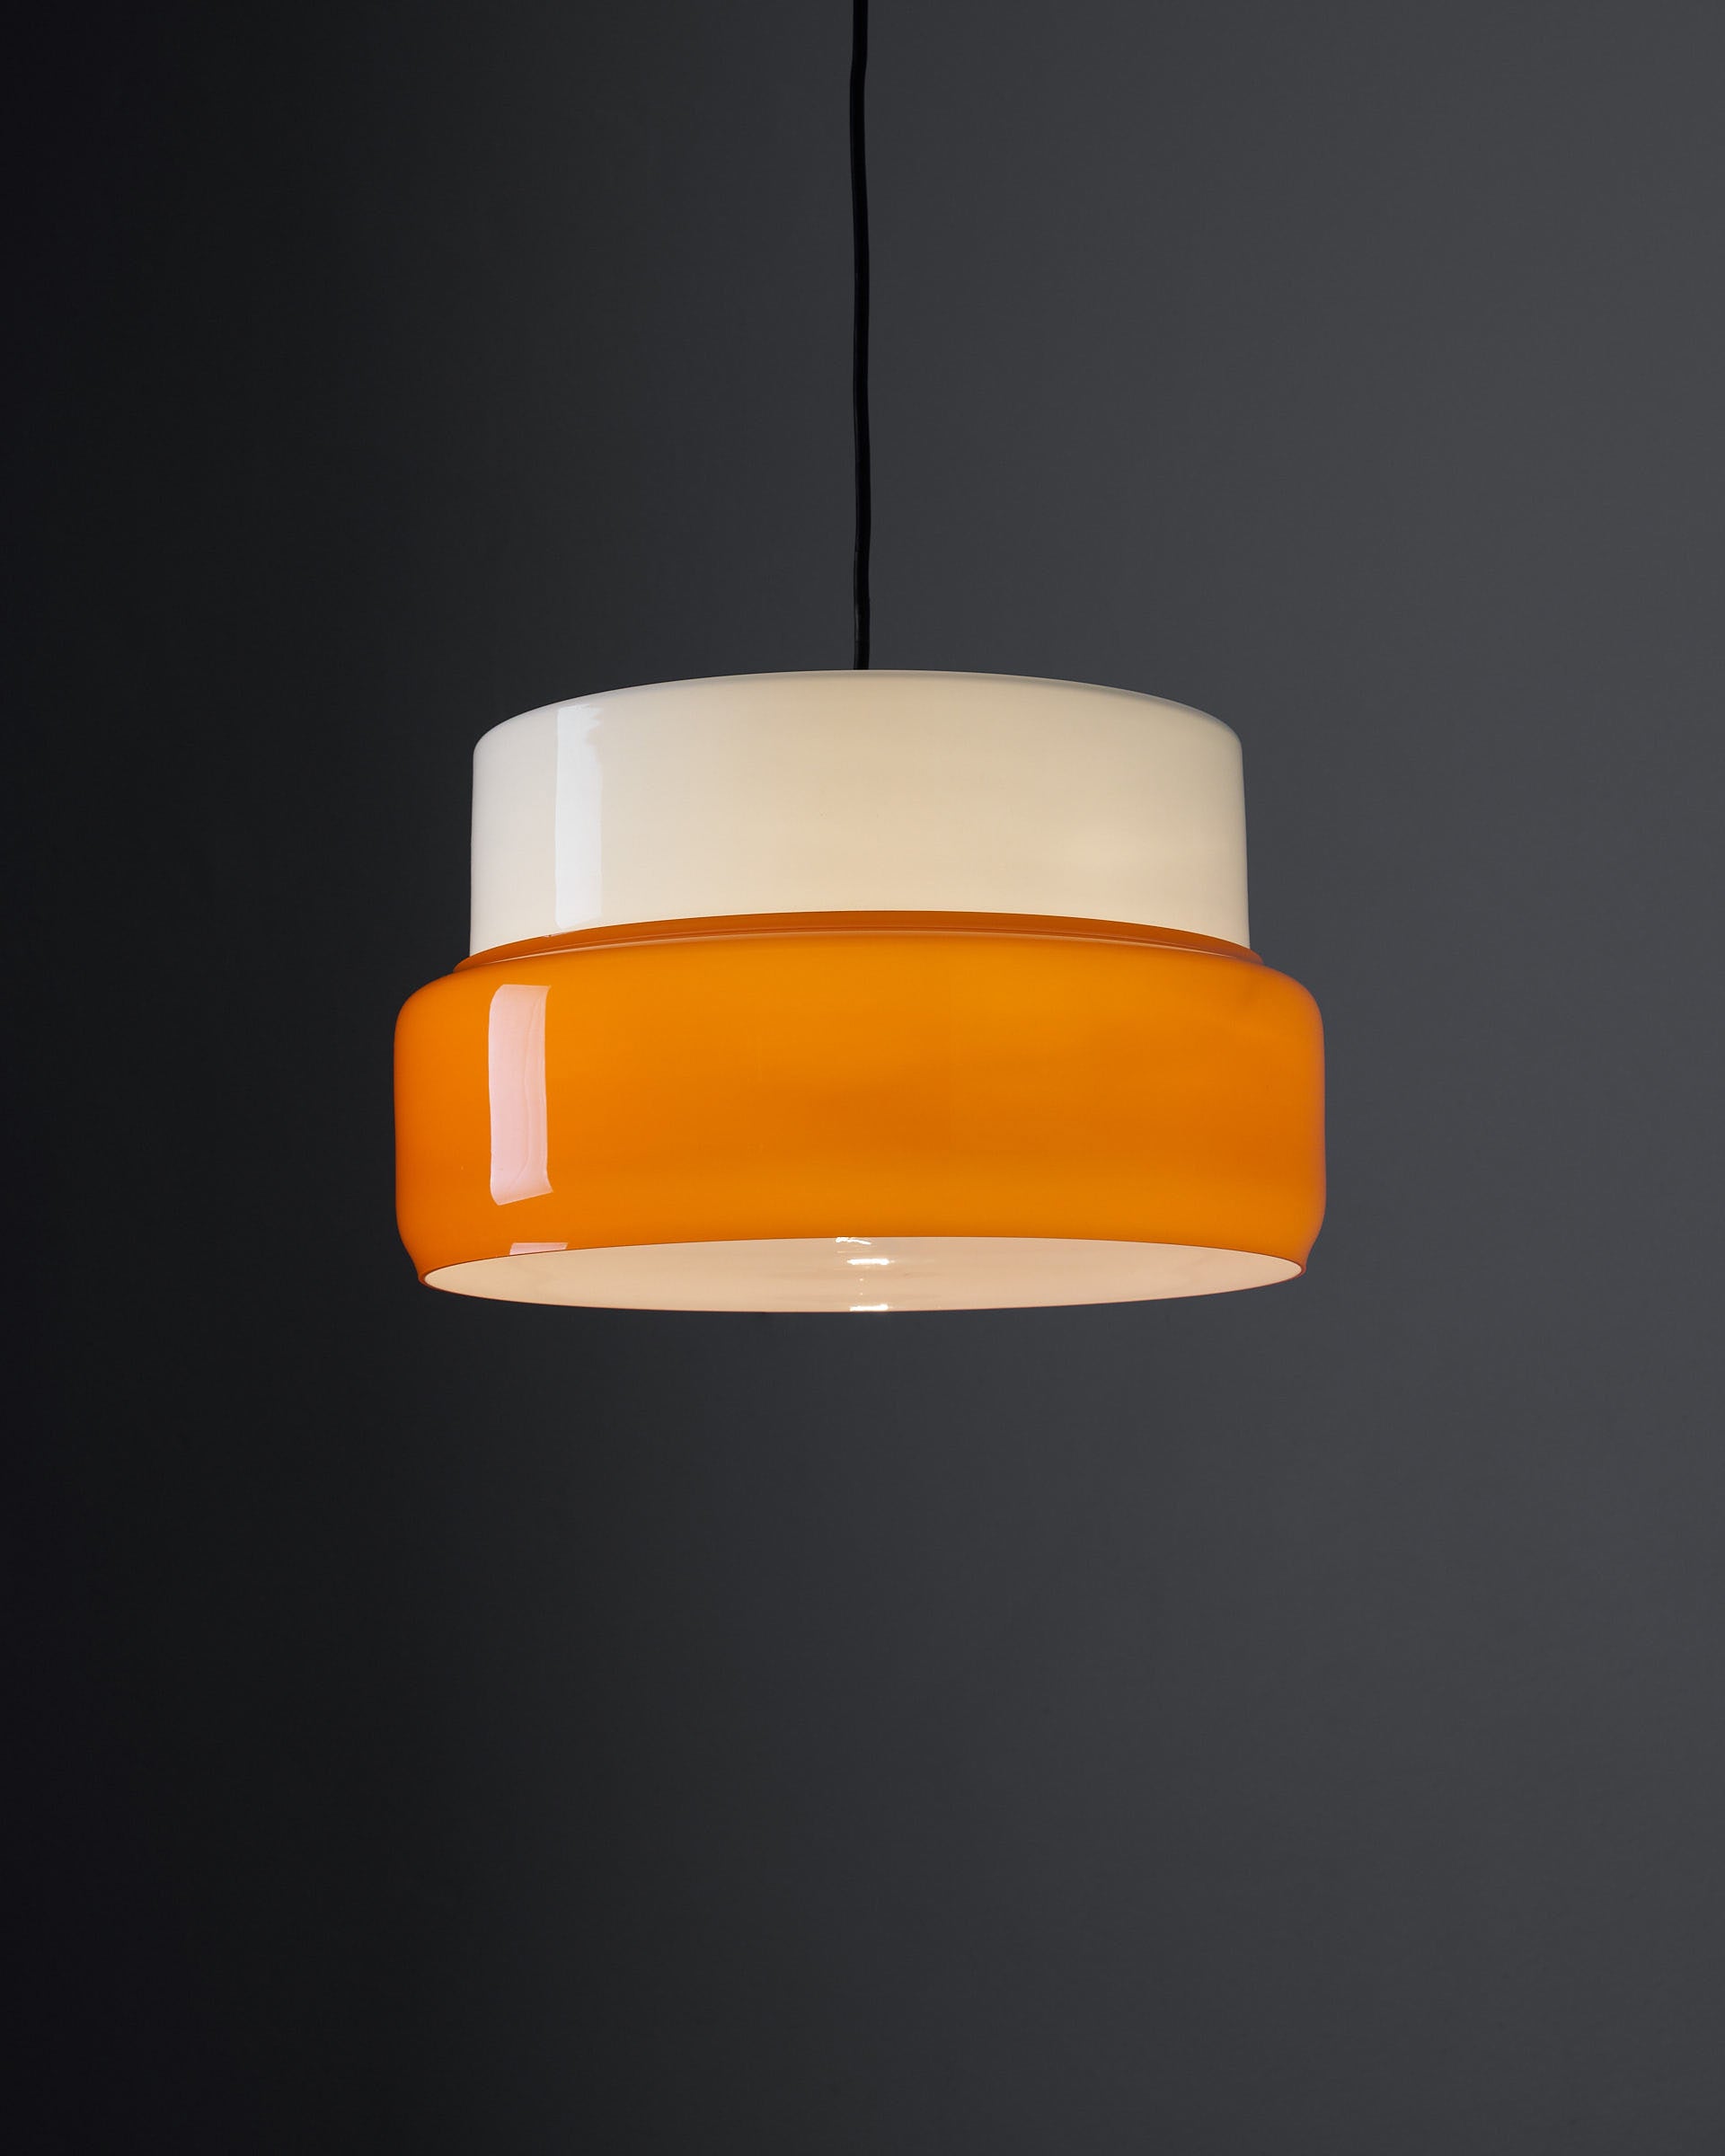 Pendant Lamp by the brand Vistosi from Italy, Lamp in Orange in Opal Murano glass.